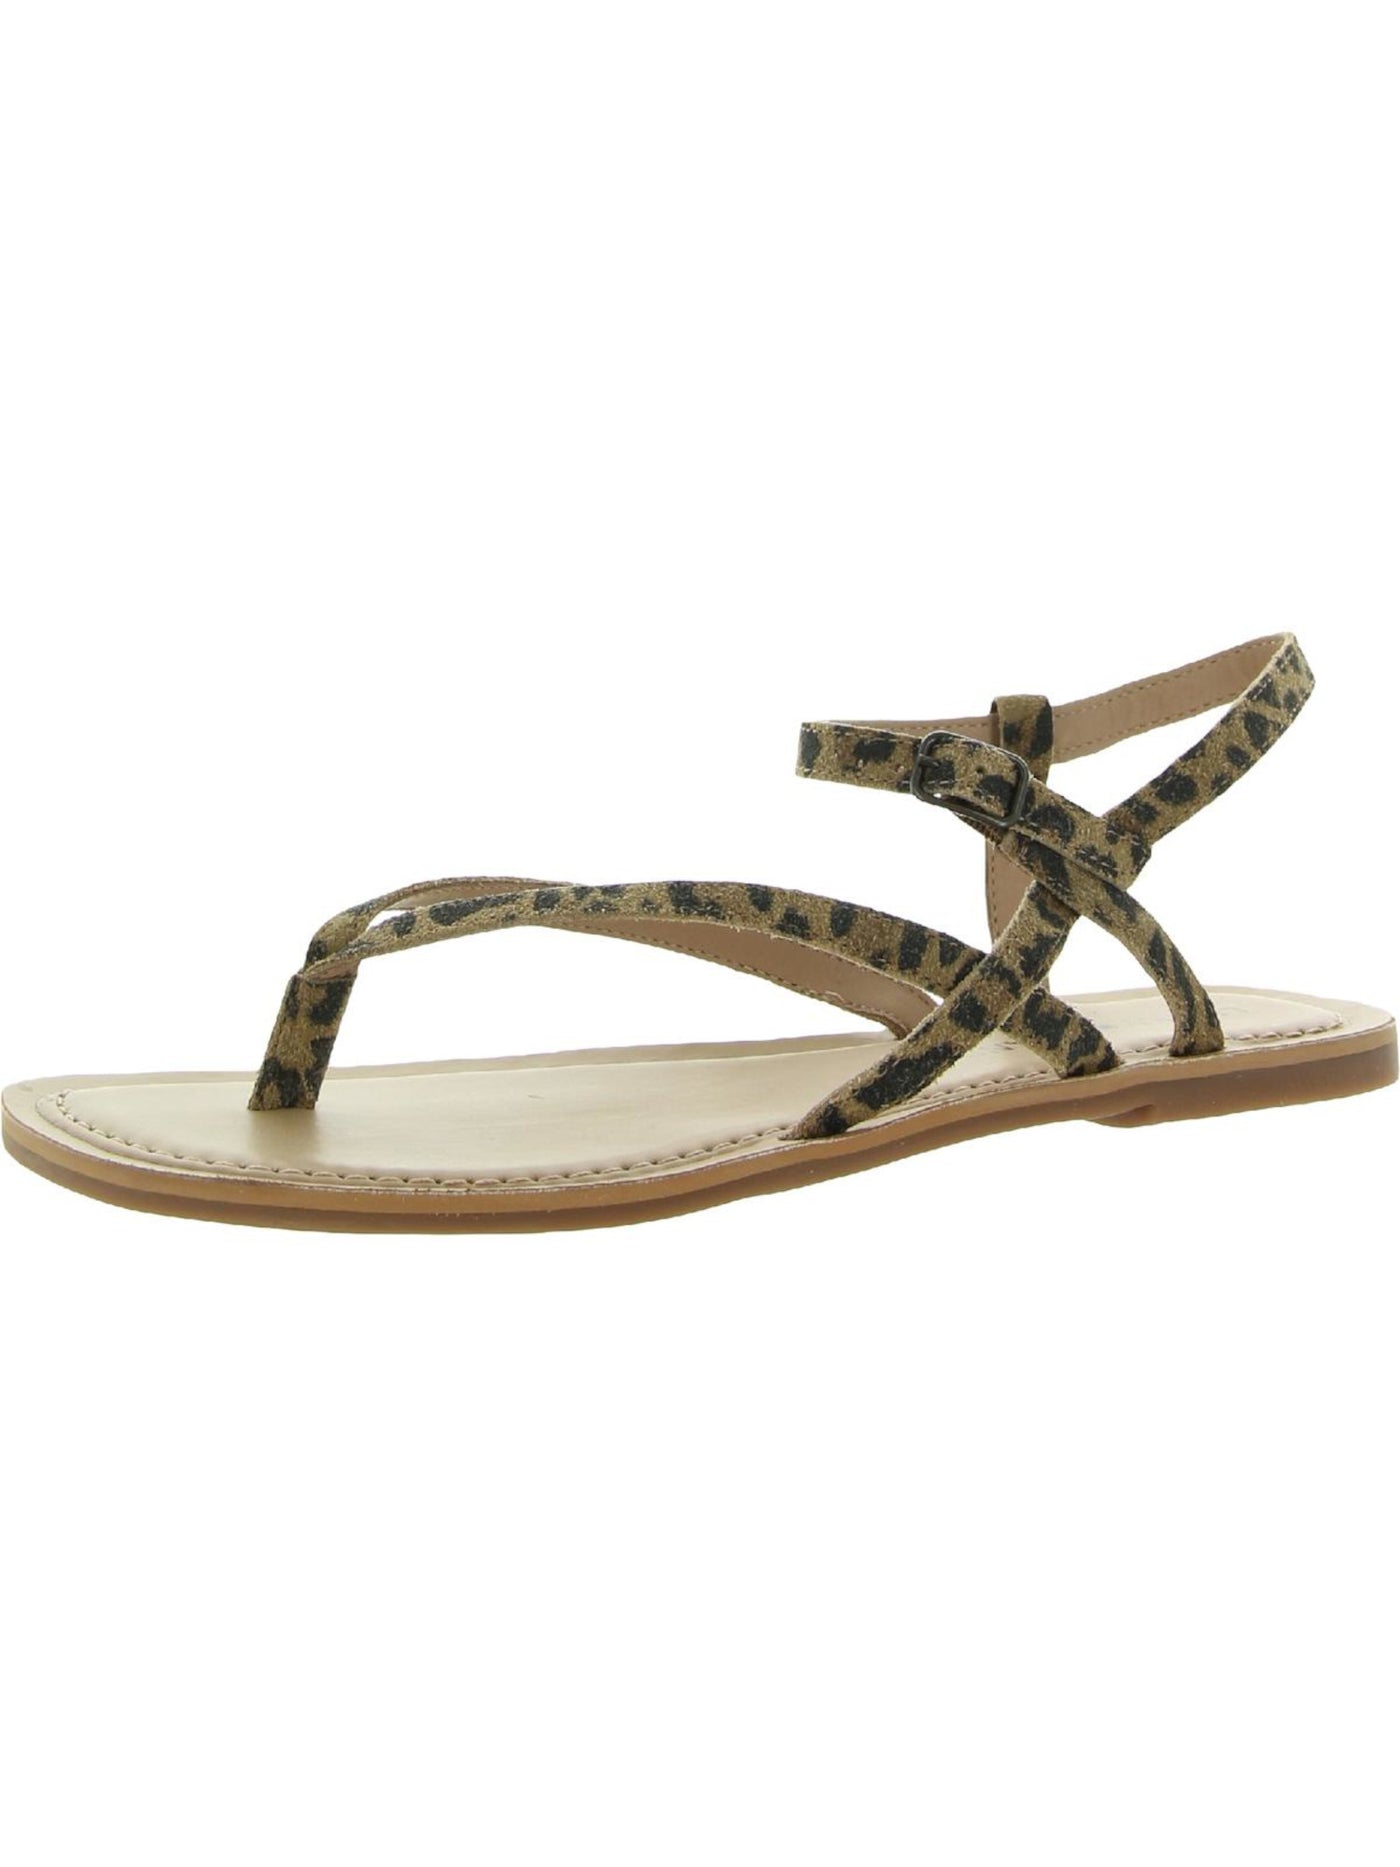 LUCKY BRAND Womens Beige Animal Print Leopard Ankle Strap Comfort Bylee Square Toe Buckle Leather Thong Sandals Shoes 5.5 M